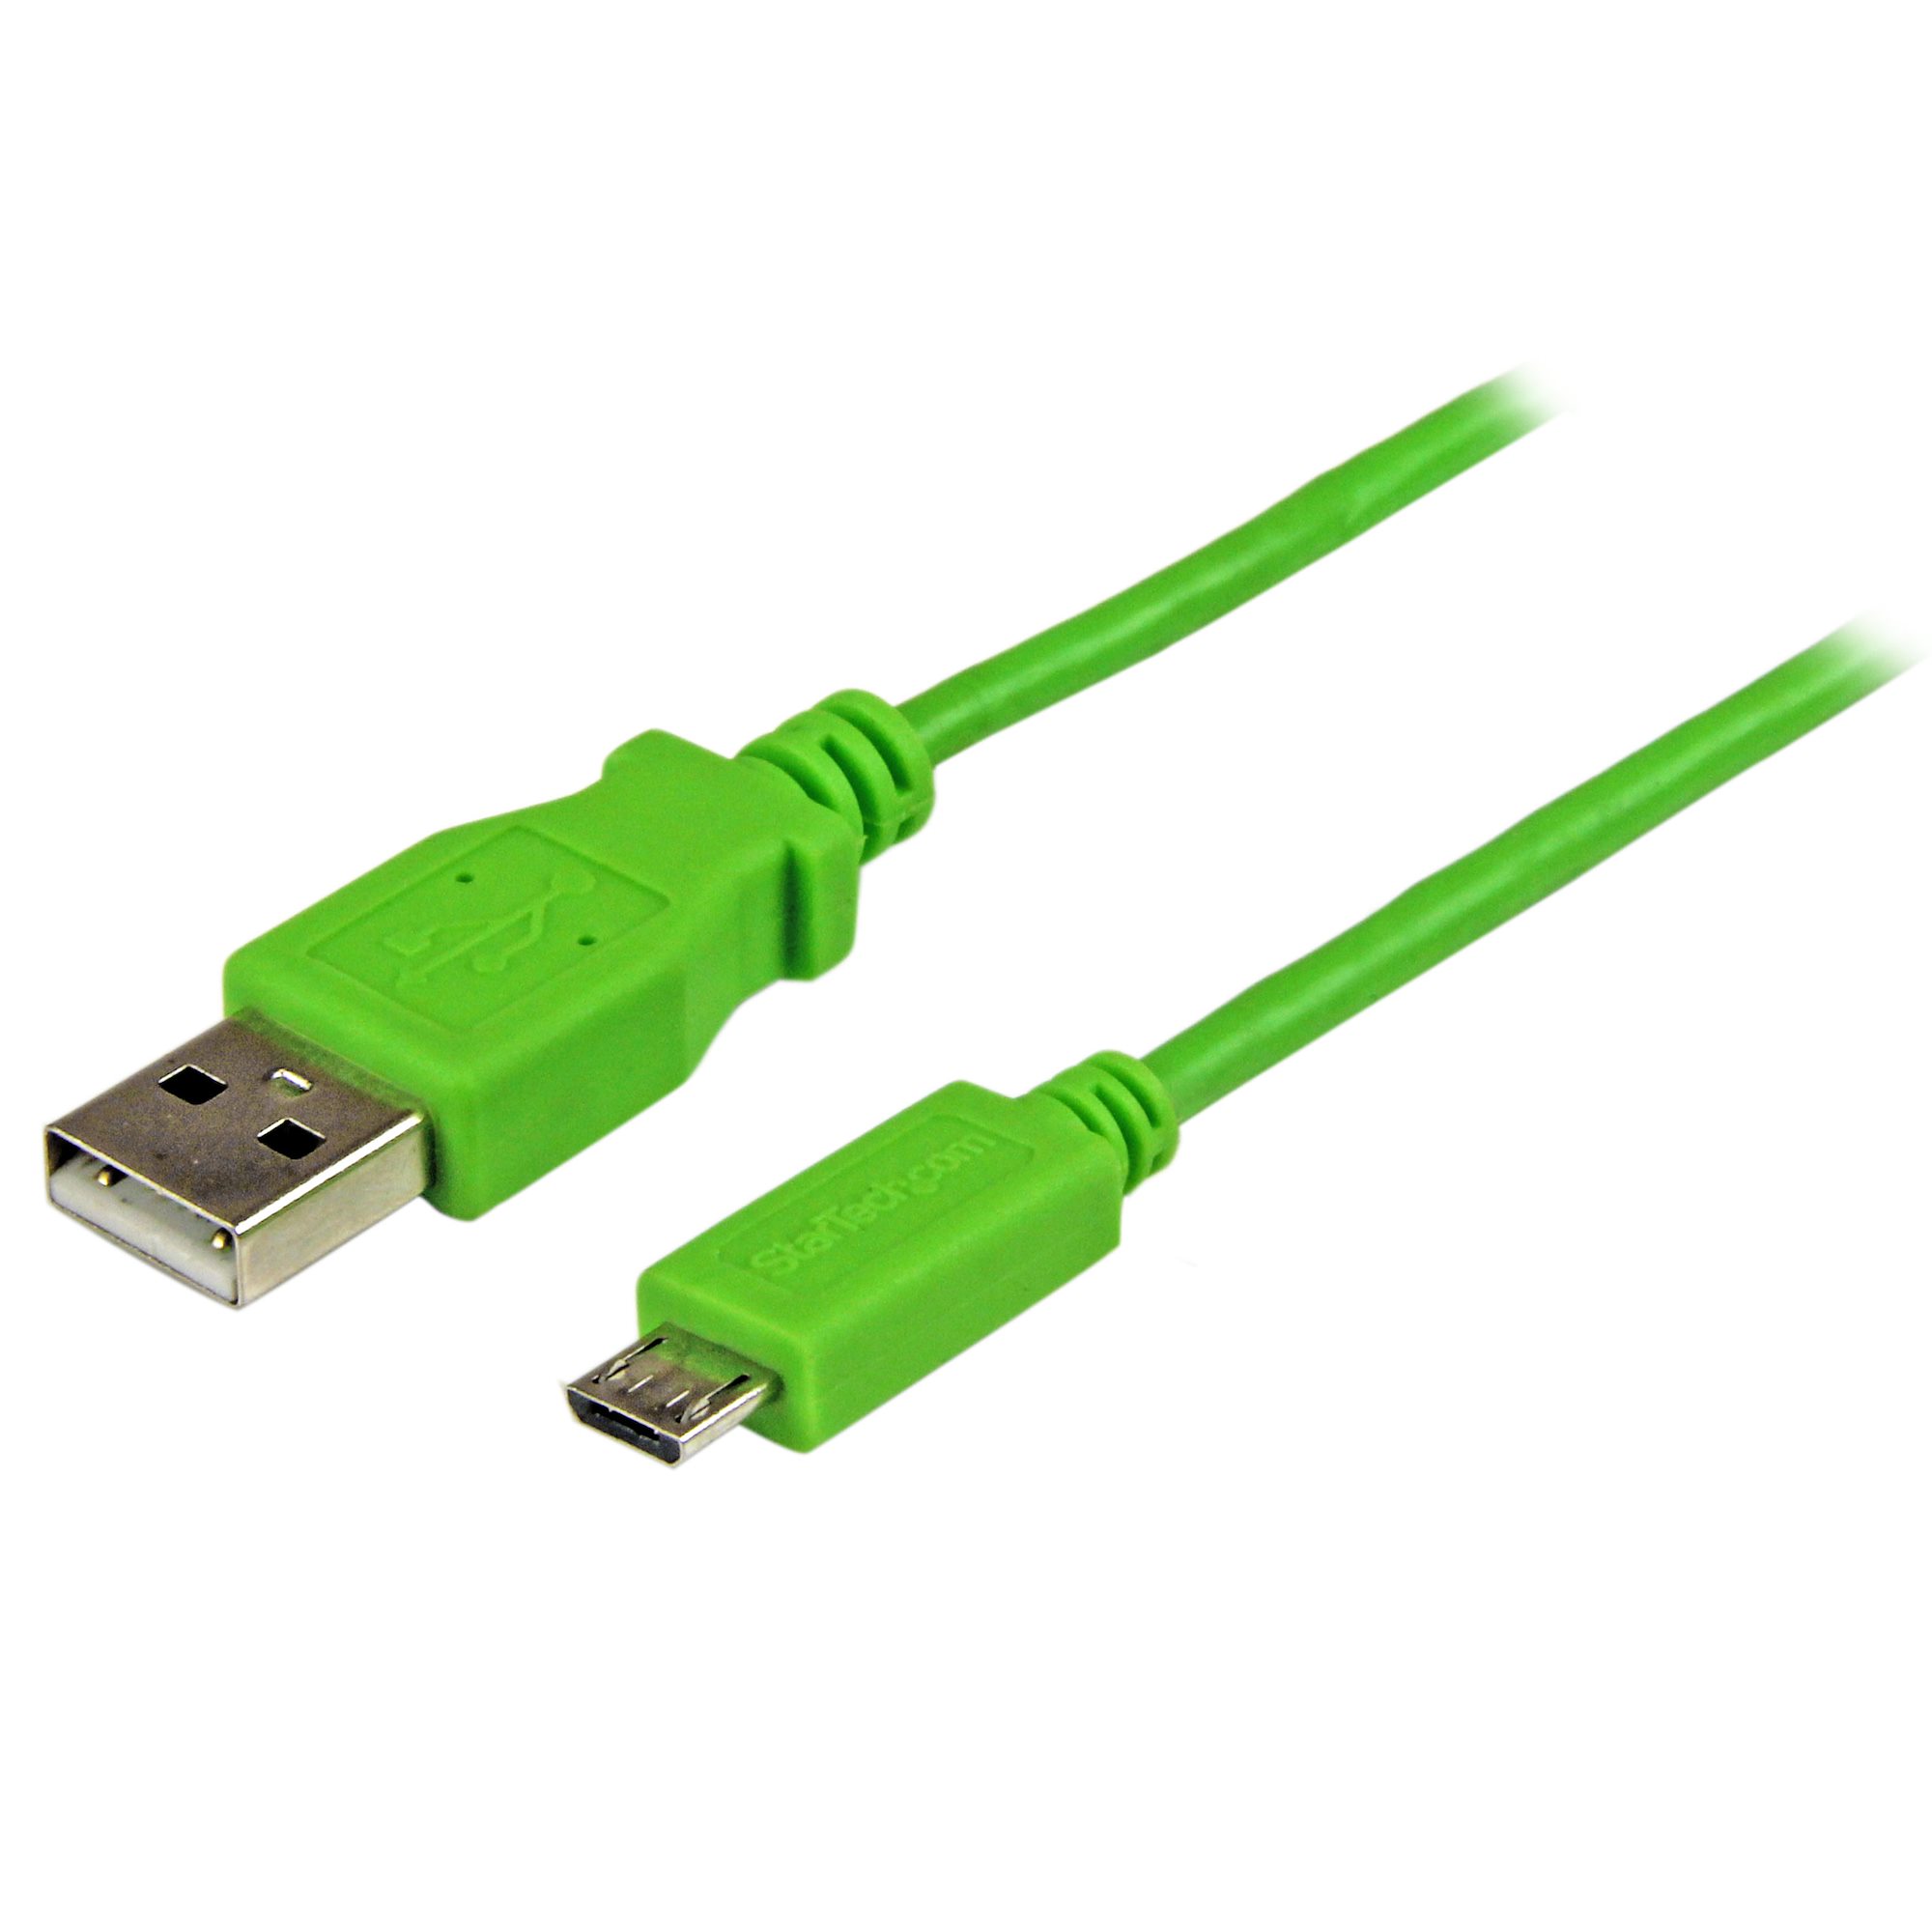 Ocean Meddele accelerator 1m Slim Micro USB Phone Charge Cable M/M - Micro USB Cables | StarTech.com